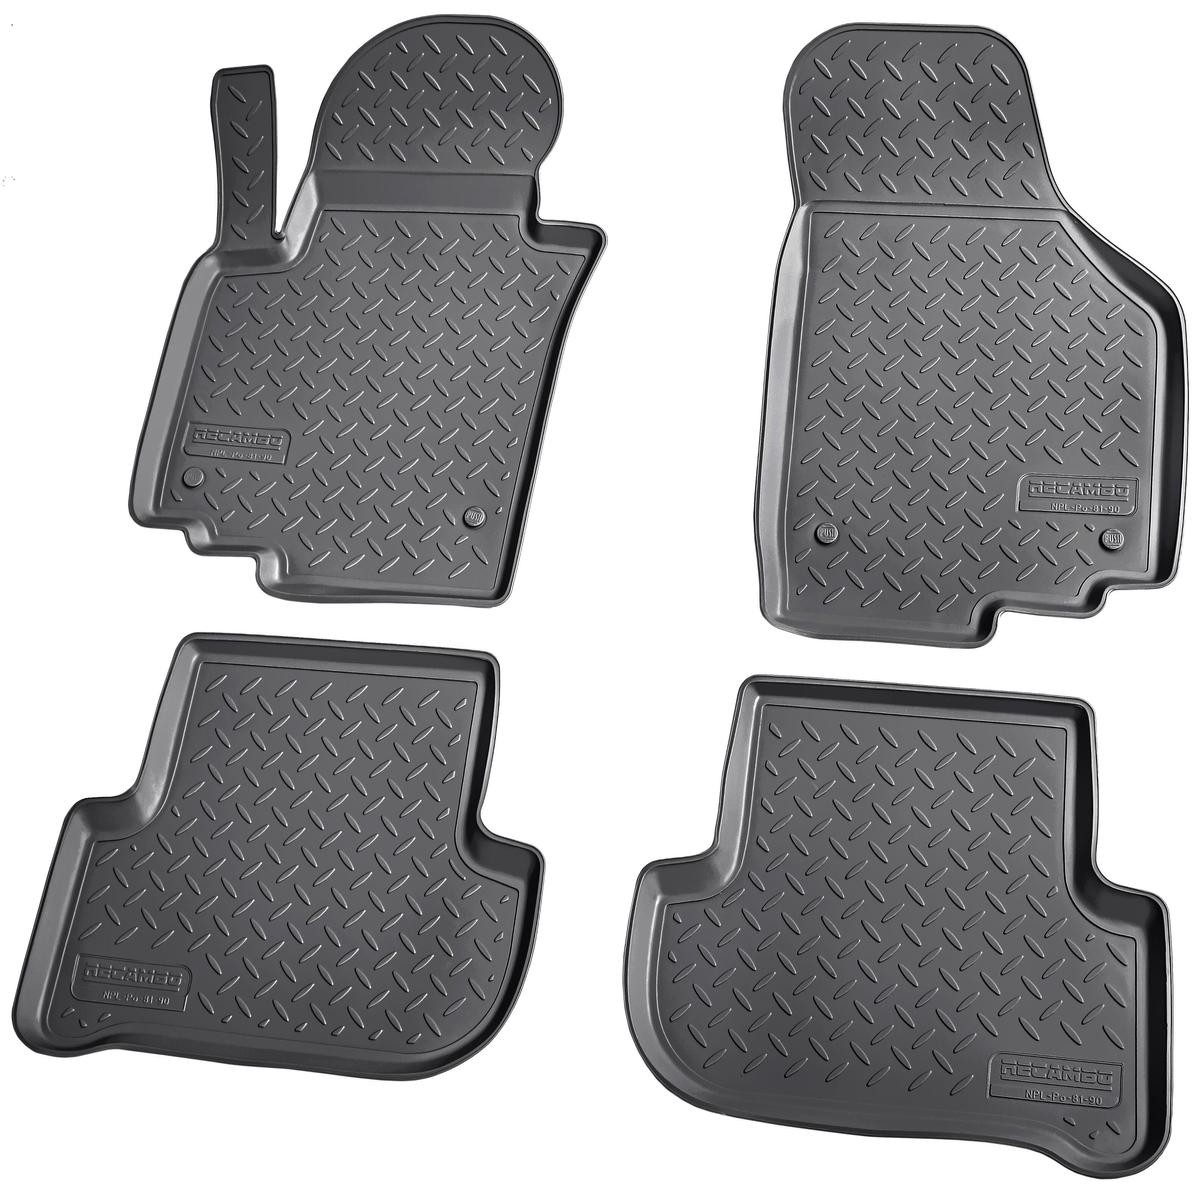 RECAMBO F-6360 Floor mats Rubber, Front and Rear, Quantity: 4, black, Tailored